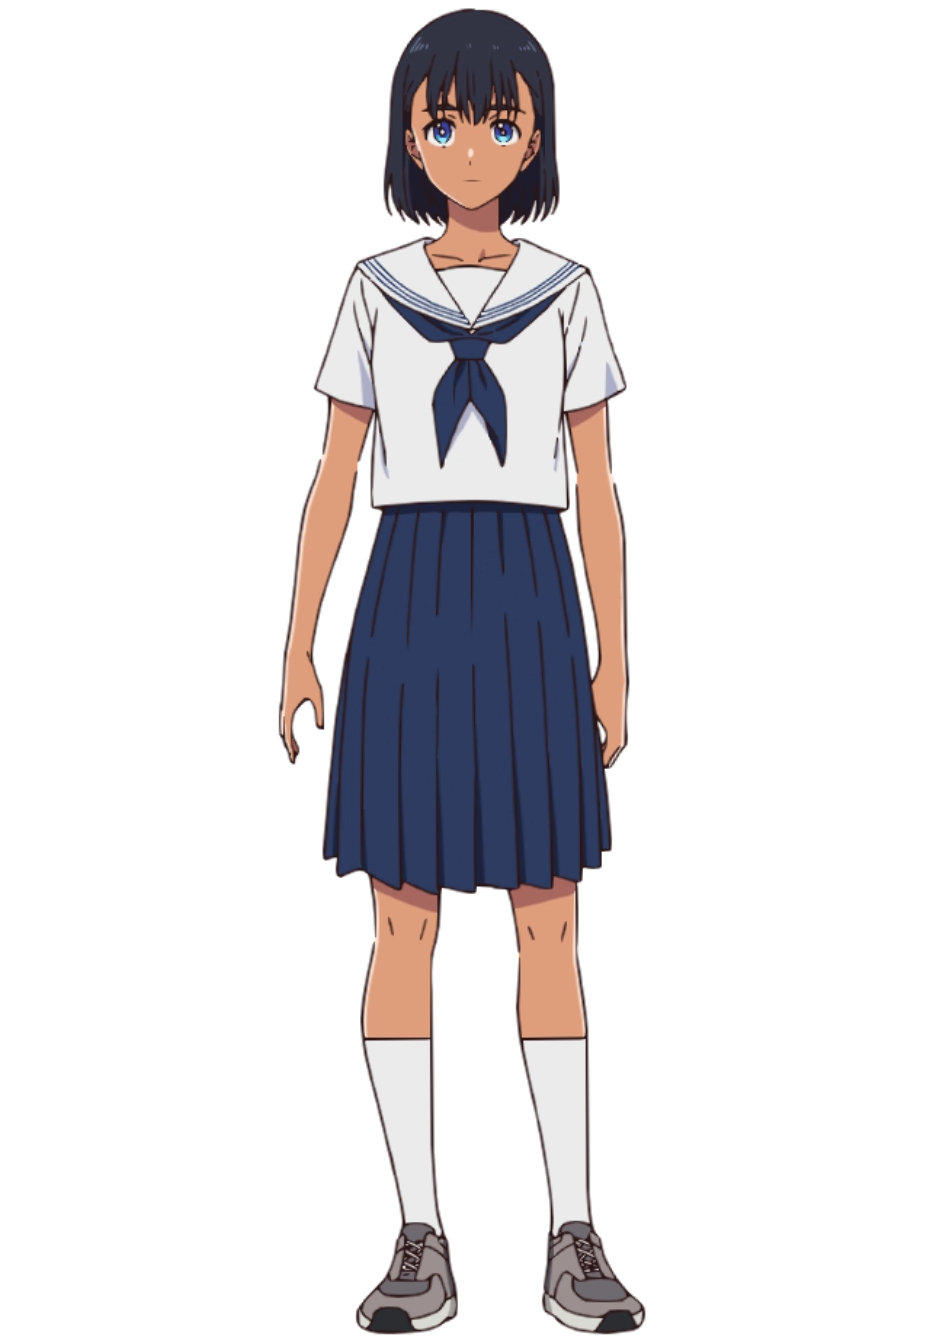 Why Is Ushio The Best Character Of The Summertime Render?